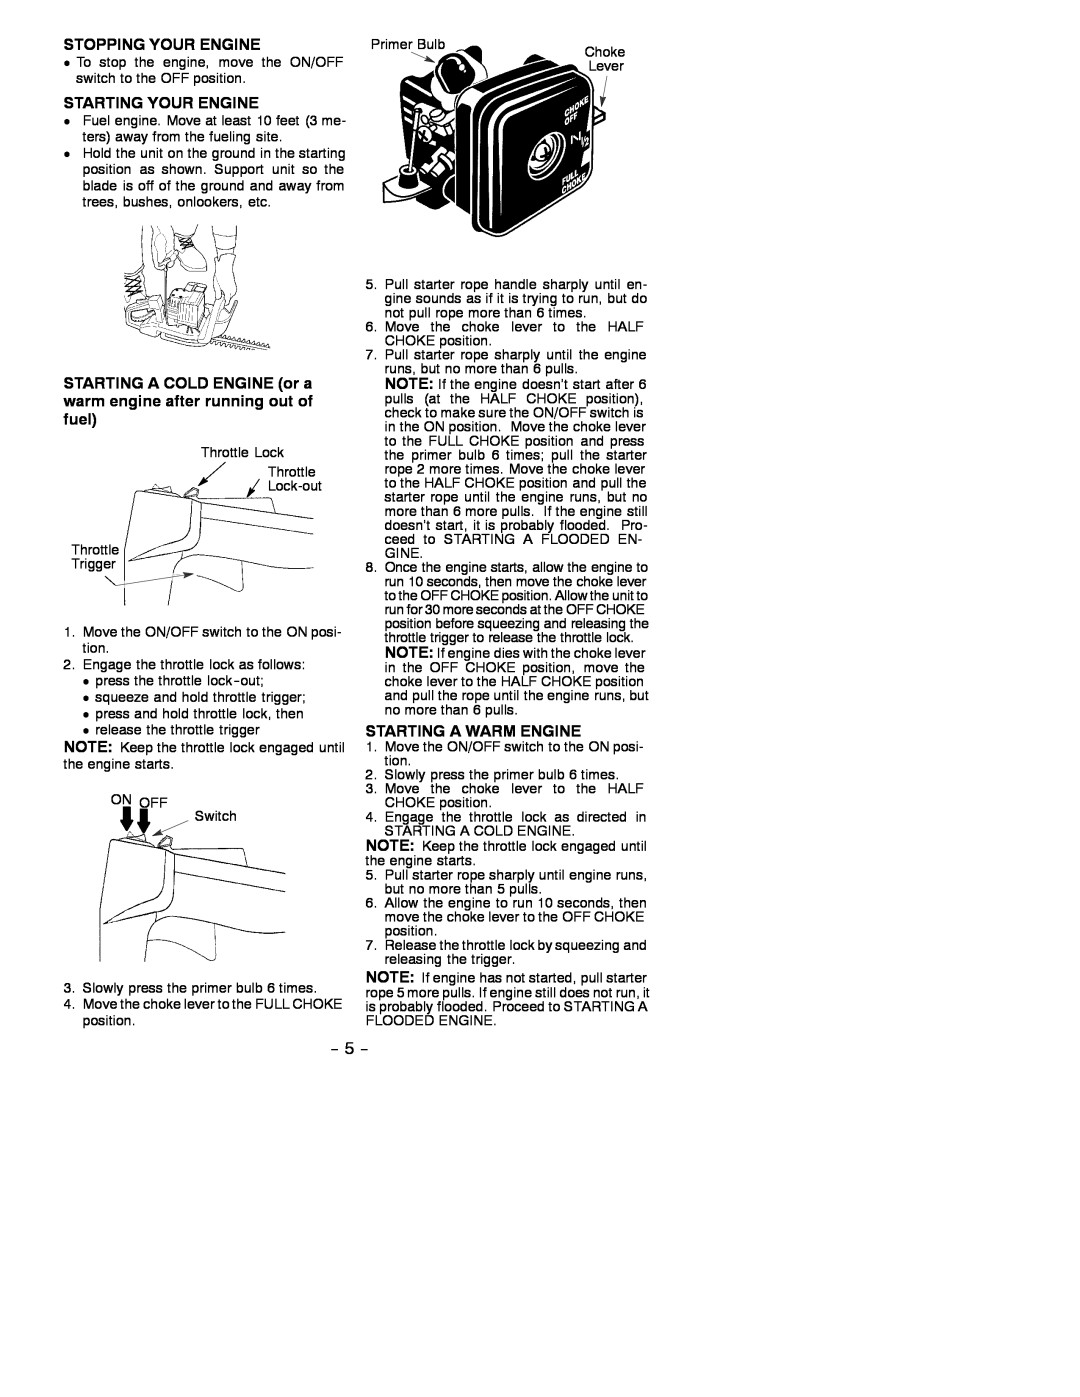 Poulan GHT 22 instruction manual Stopping Your Engine, Starting Your Engine, Starting A Warm Engine 